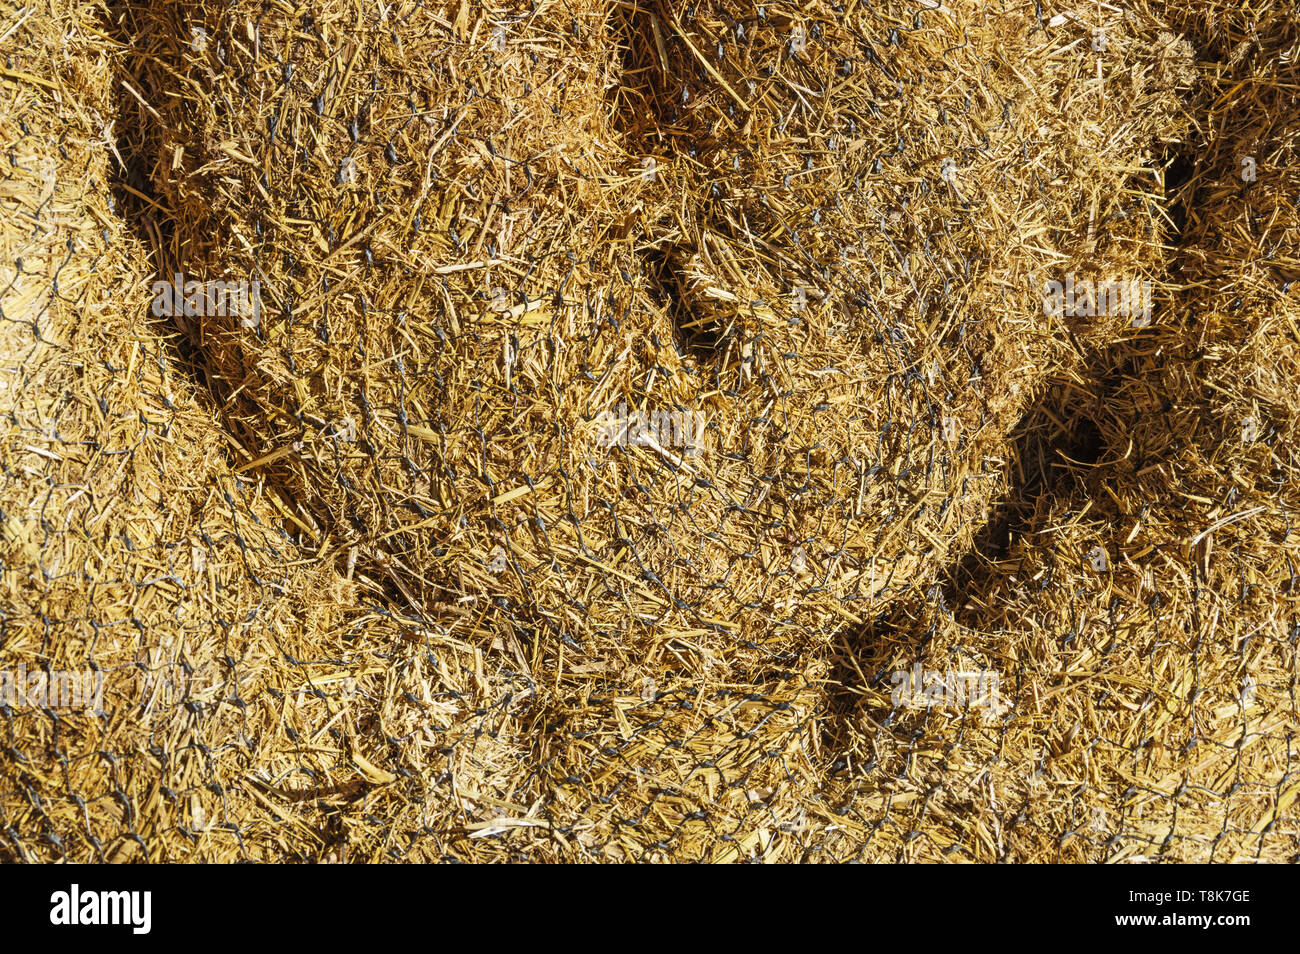 straw wattle coil with netting background Stock Photo